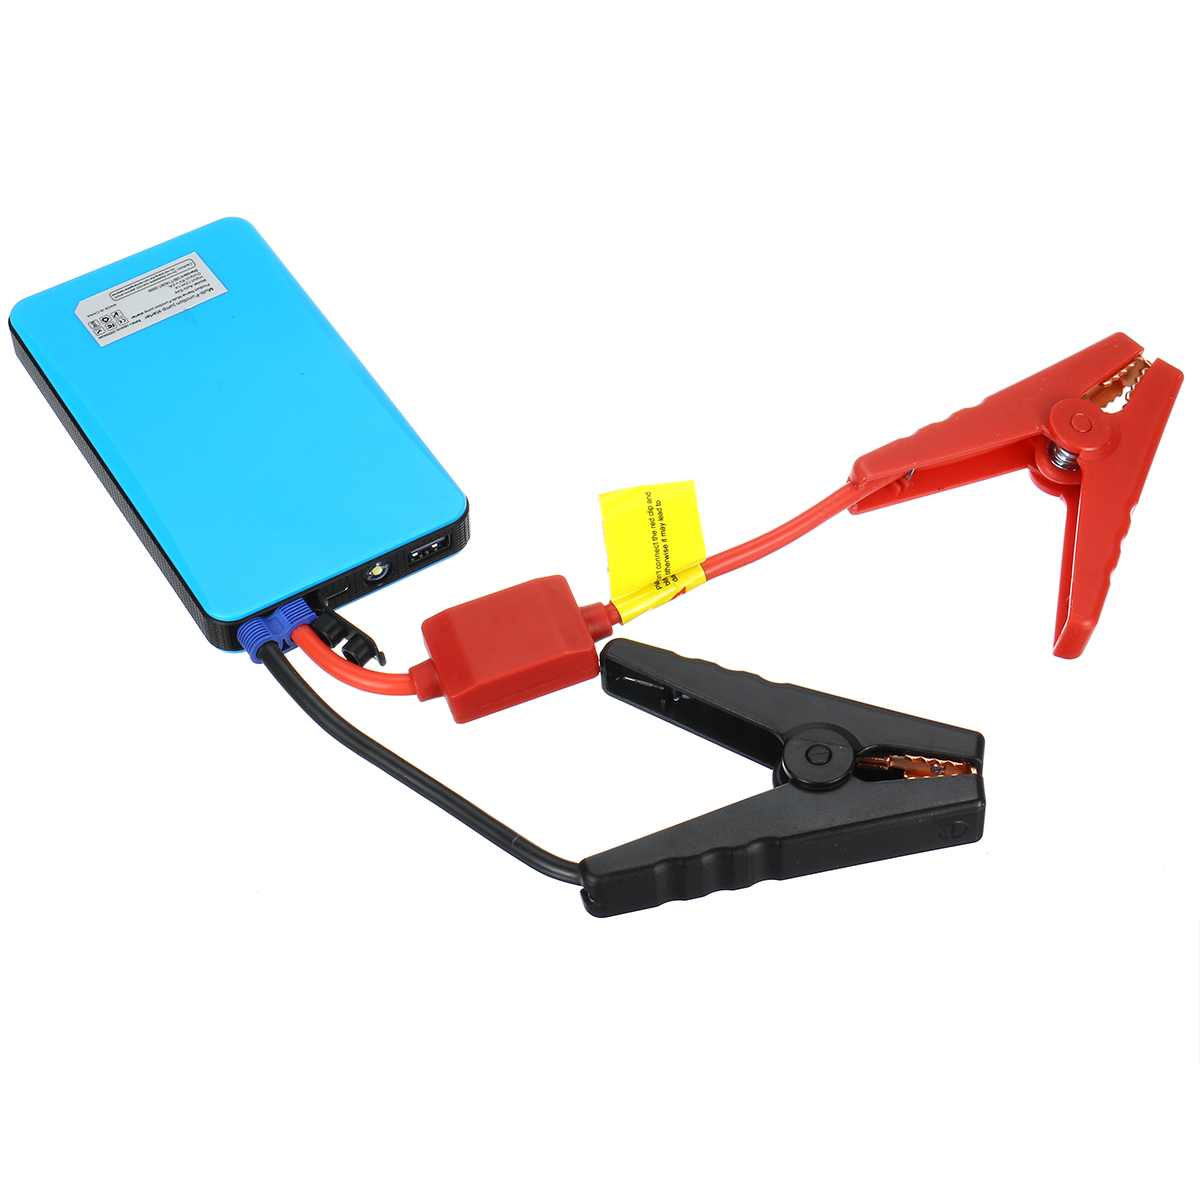 20000mAh-12V-2A-Auto-Jump-Starter-Booster-Charger-Battery-Smartphone-Power-Bank-1430175-8